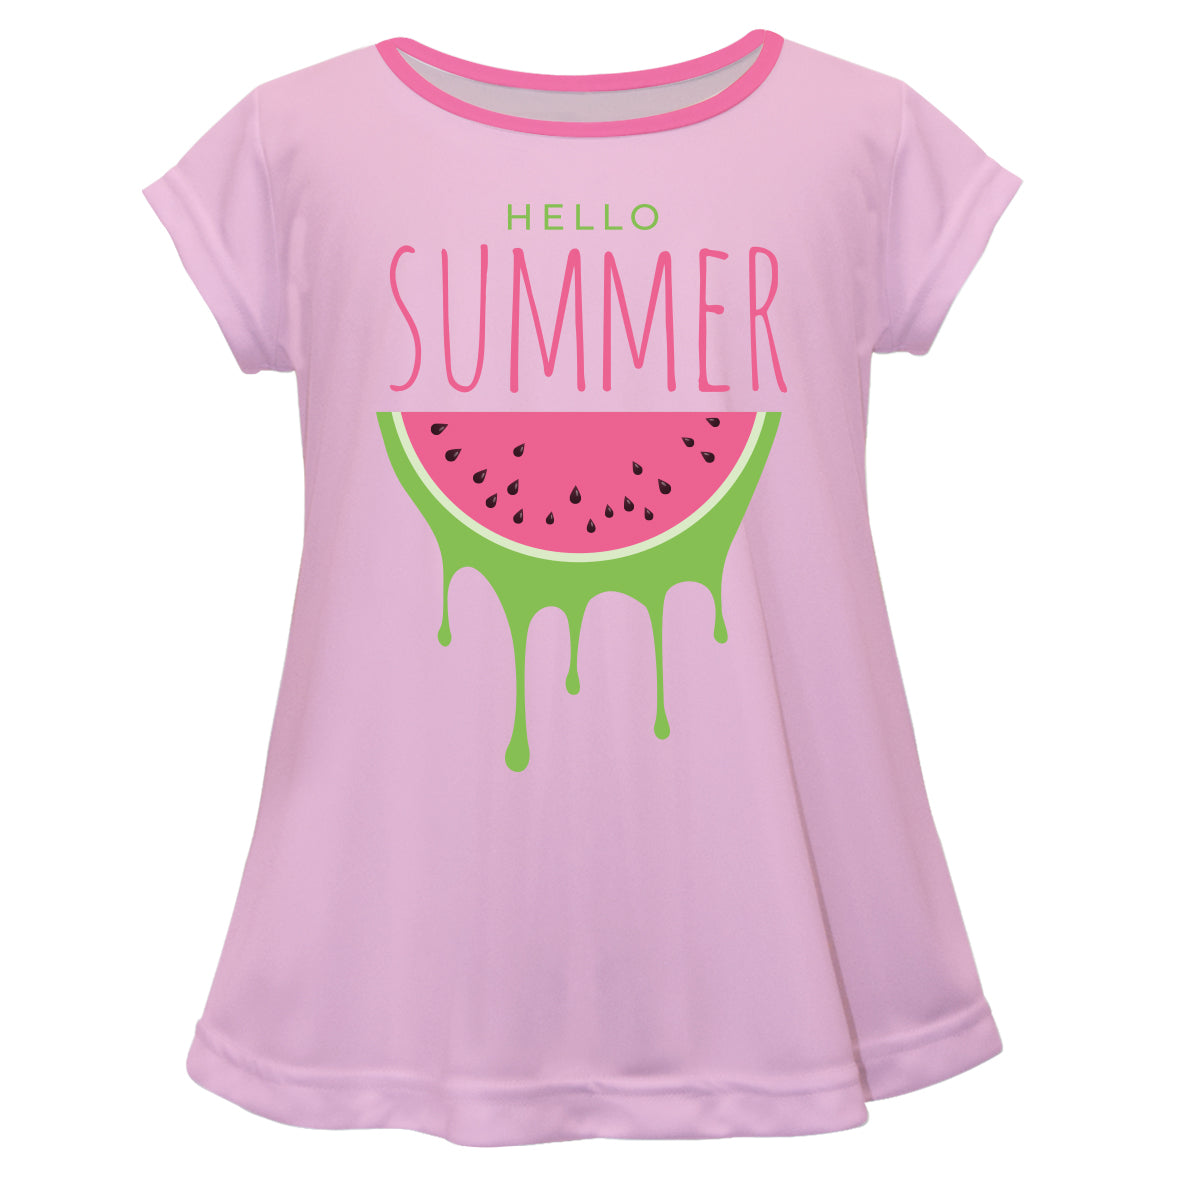 Watermelon Pink Short Sleeve Laurie Top